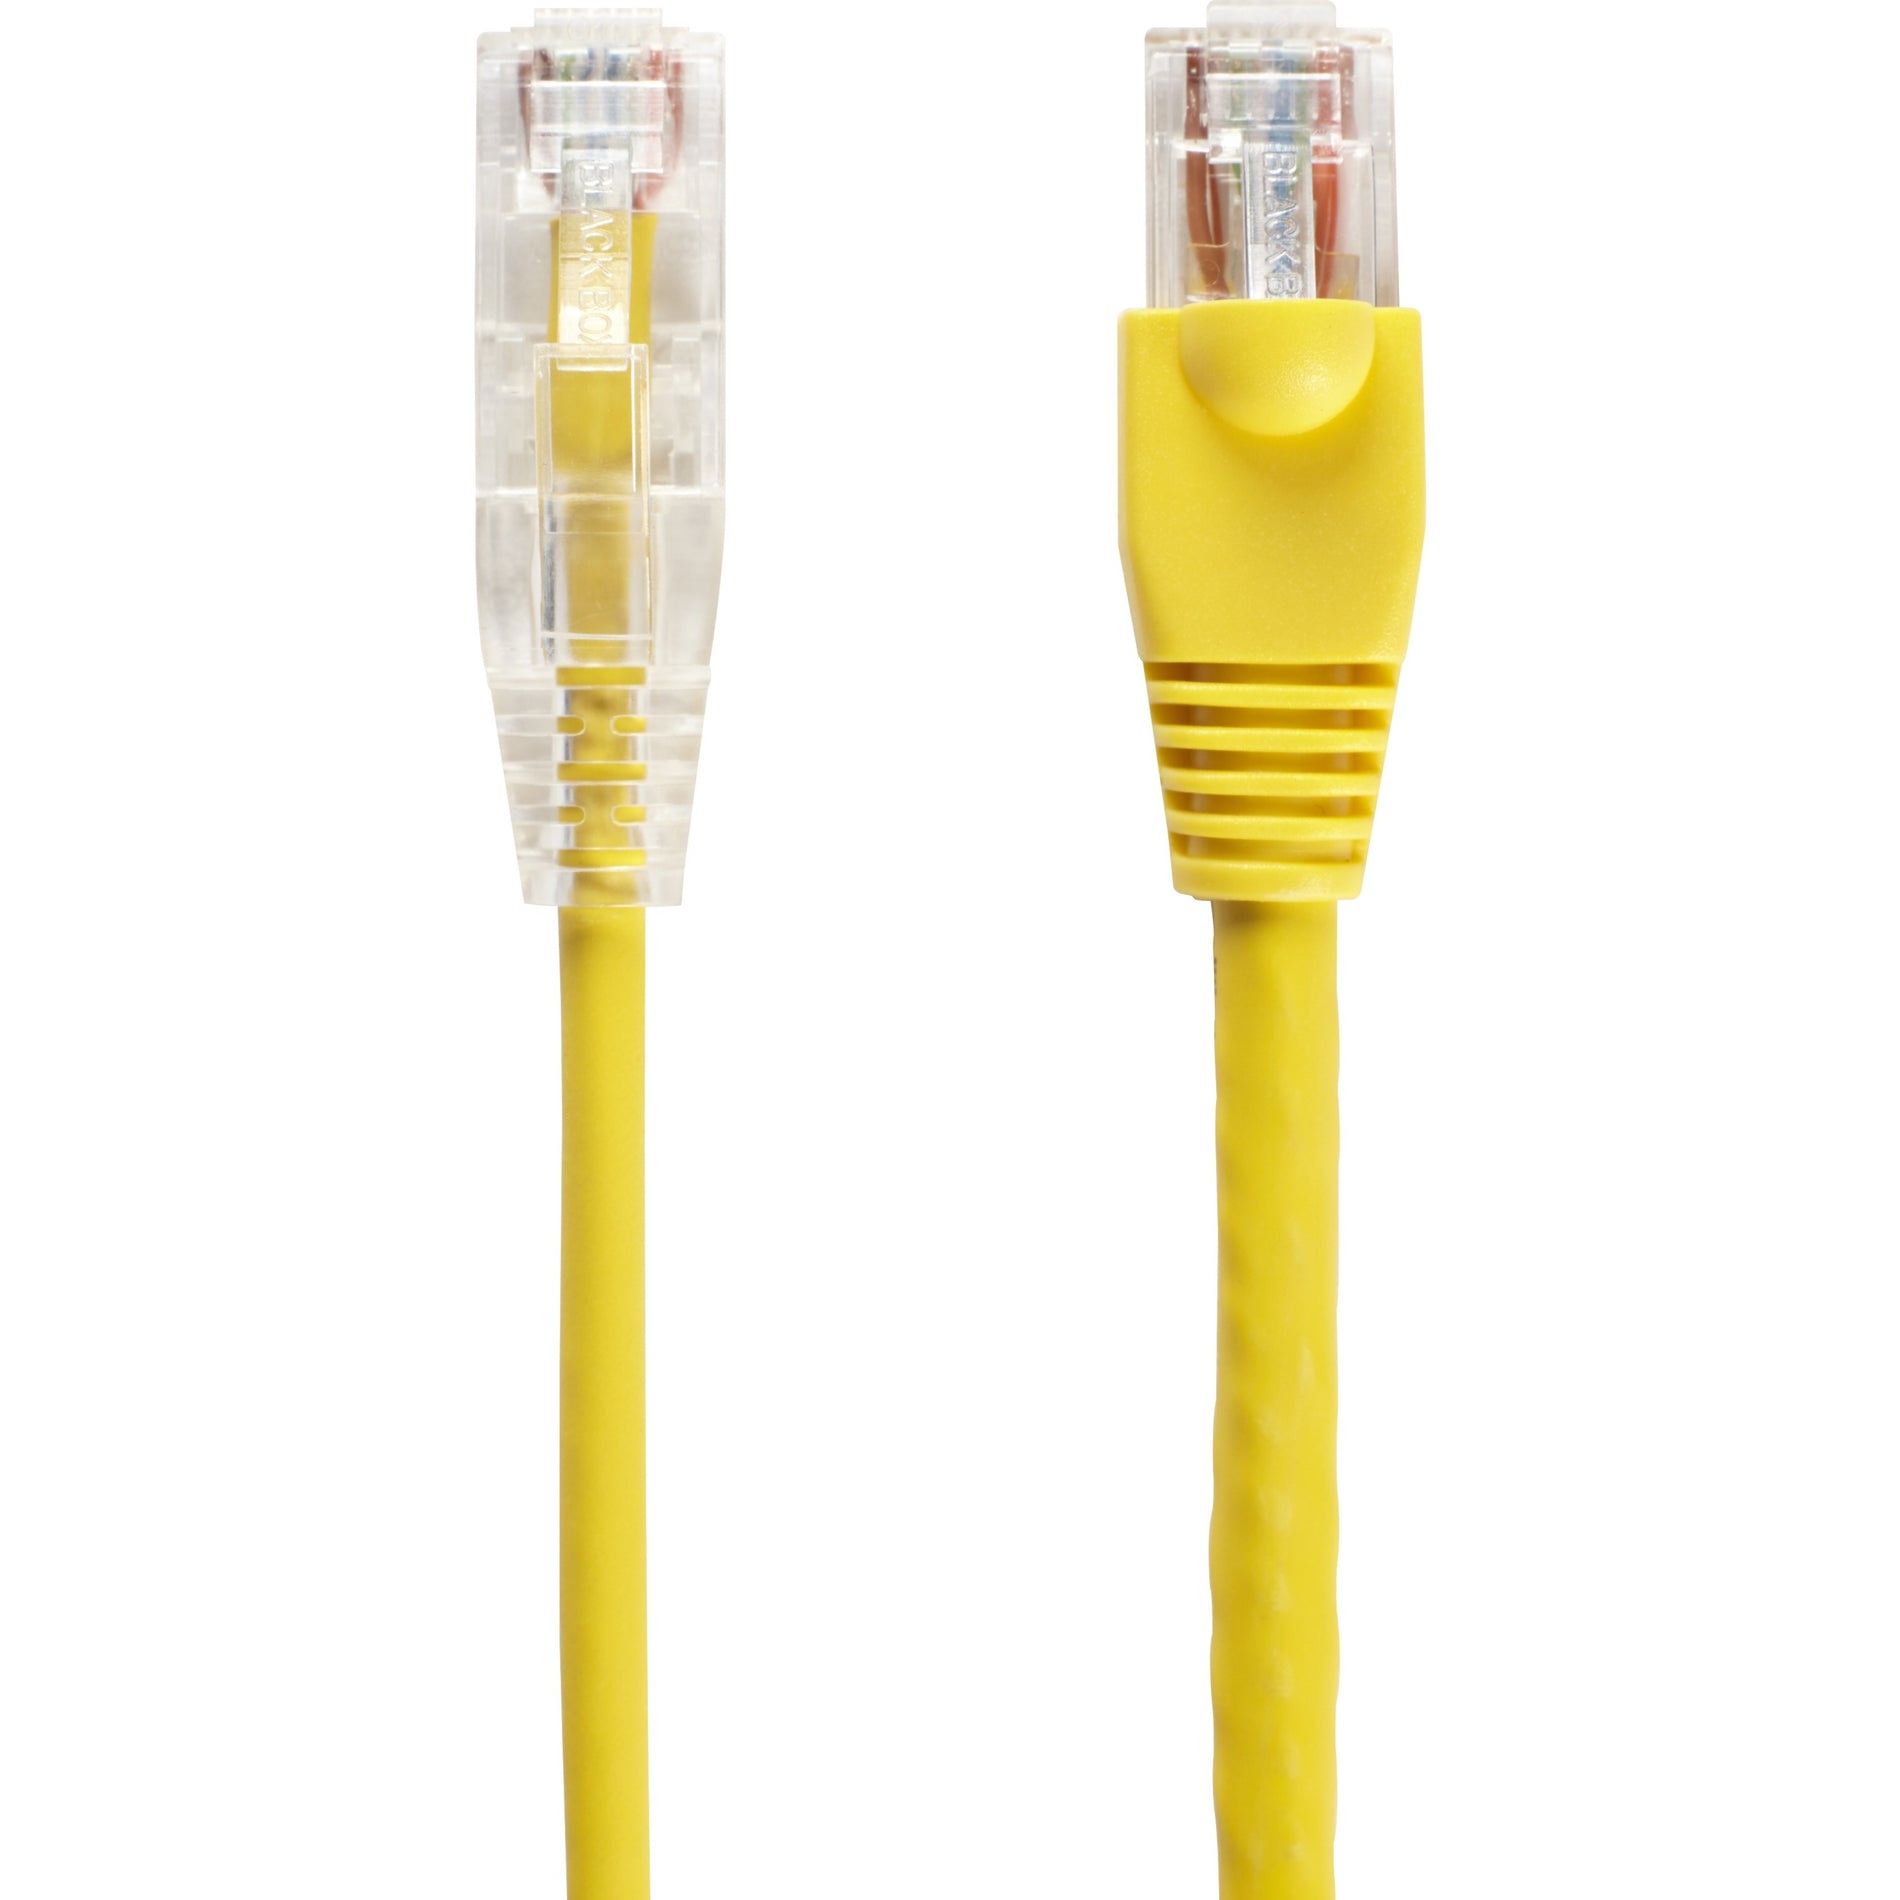 Black Box C6APC28-YL-01 Slim-Net Cat.6a UTP Patch Network Cable, 1 ft, 10 Gbit/s, Snagless Boot